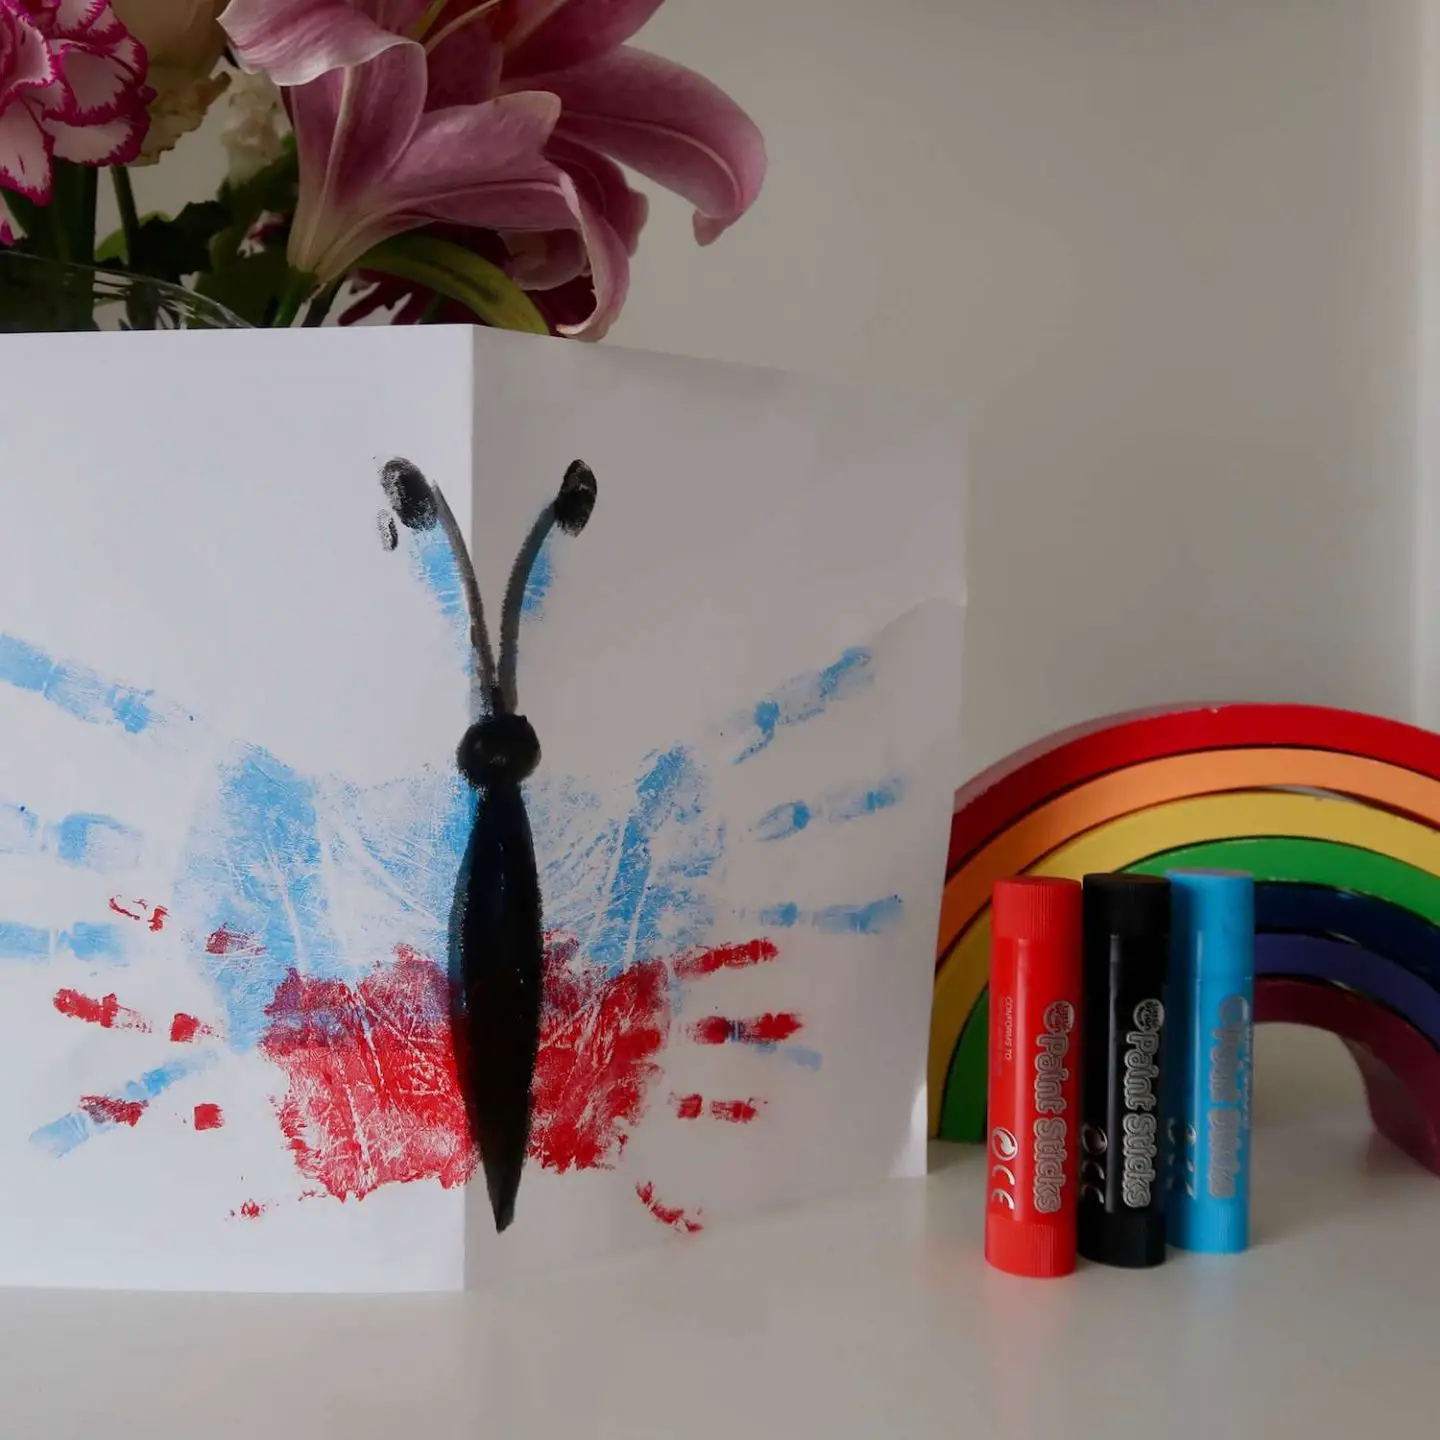 A handprint butterfly card next to some paint sticks and a wooden rainbow